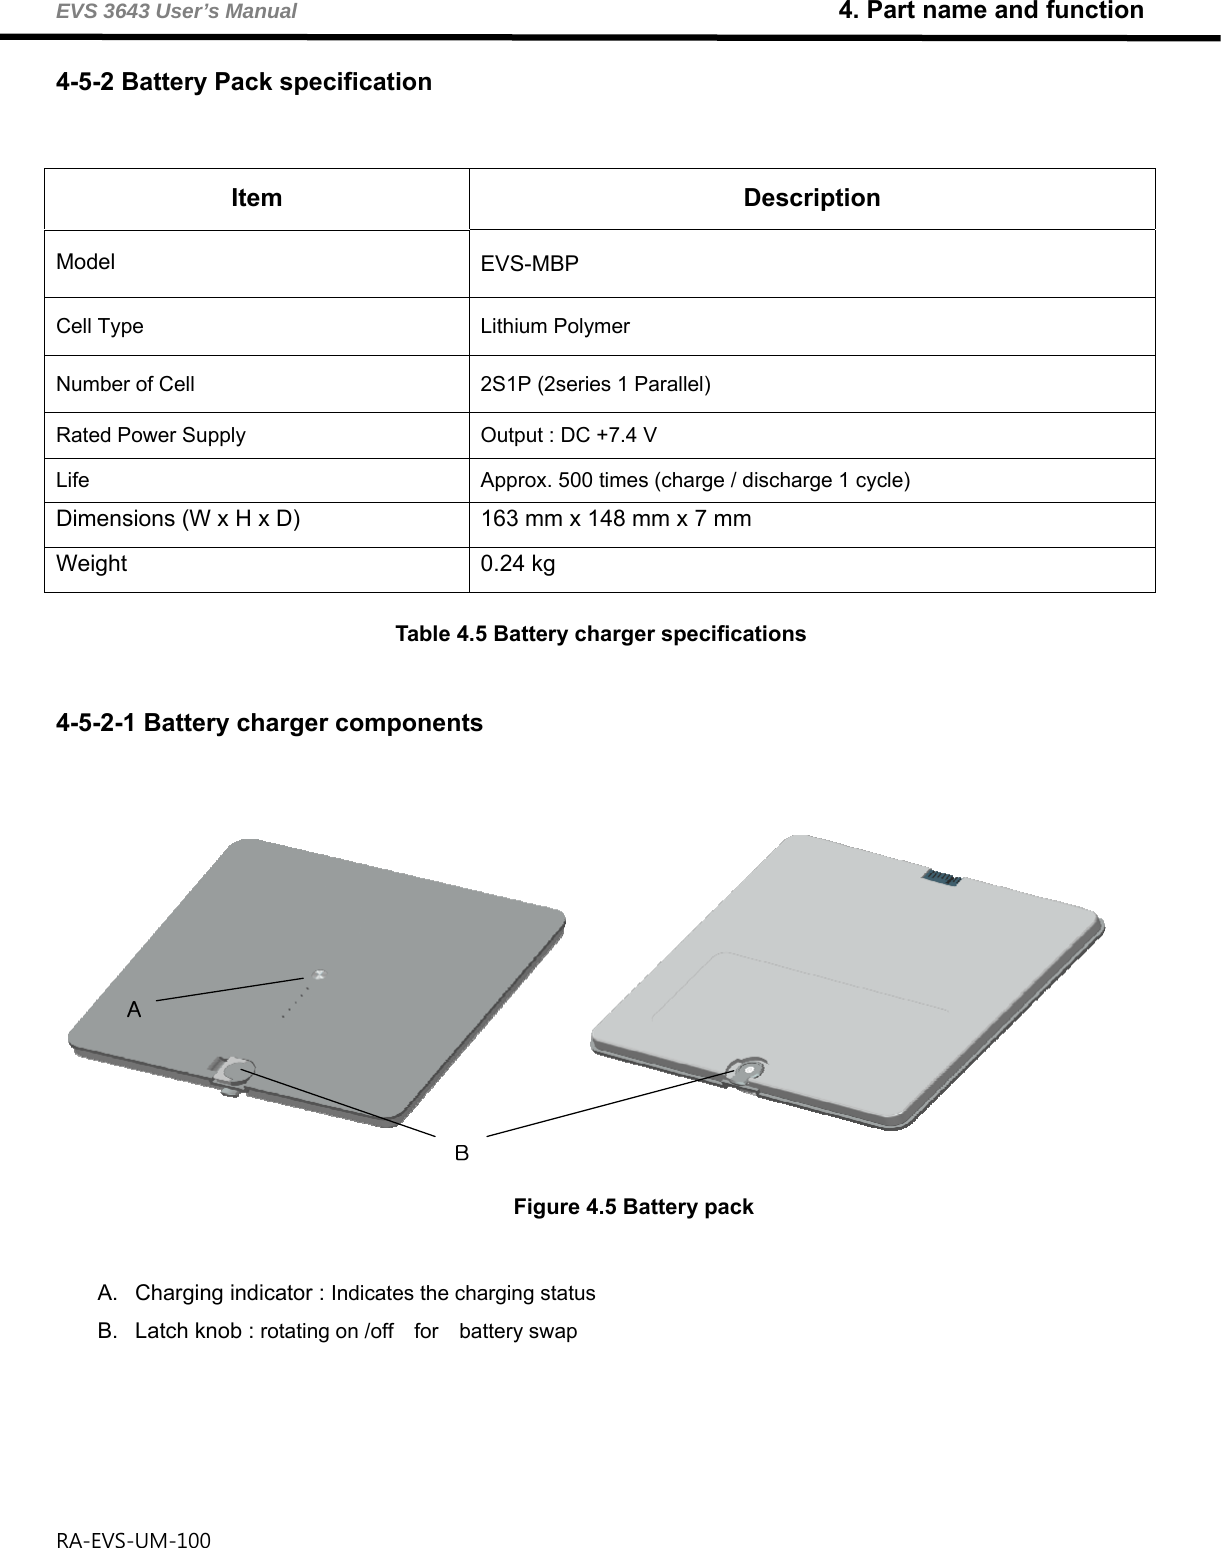 EVS 3643 User’s Manual                                                    4. Part name and function RA-EVS-UM-100                  4-5-2 Battery Pack specification  Item Description Model  EVS-MBP Cell Type   Lithium Polymer     Number of Cell  2S1P (2series 1 Parallel) Rated Power Supply Output : DC +7.4 V   Life  Approx. 500 times (charge / discharge 1 cycle)   Dimensions (W x H x D)  163 mm x 148 mm x 7 mm Weight 0.24 kg  Table 4.5 Battery charger specifications  4-5-2-1 Battery charger components   Figure 4.5 Battery pack  A.  Charging indicator : Indicates the charging status  B.  Latch knob : rotating on /off  for  battery swap   